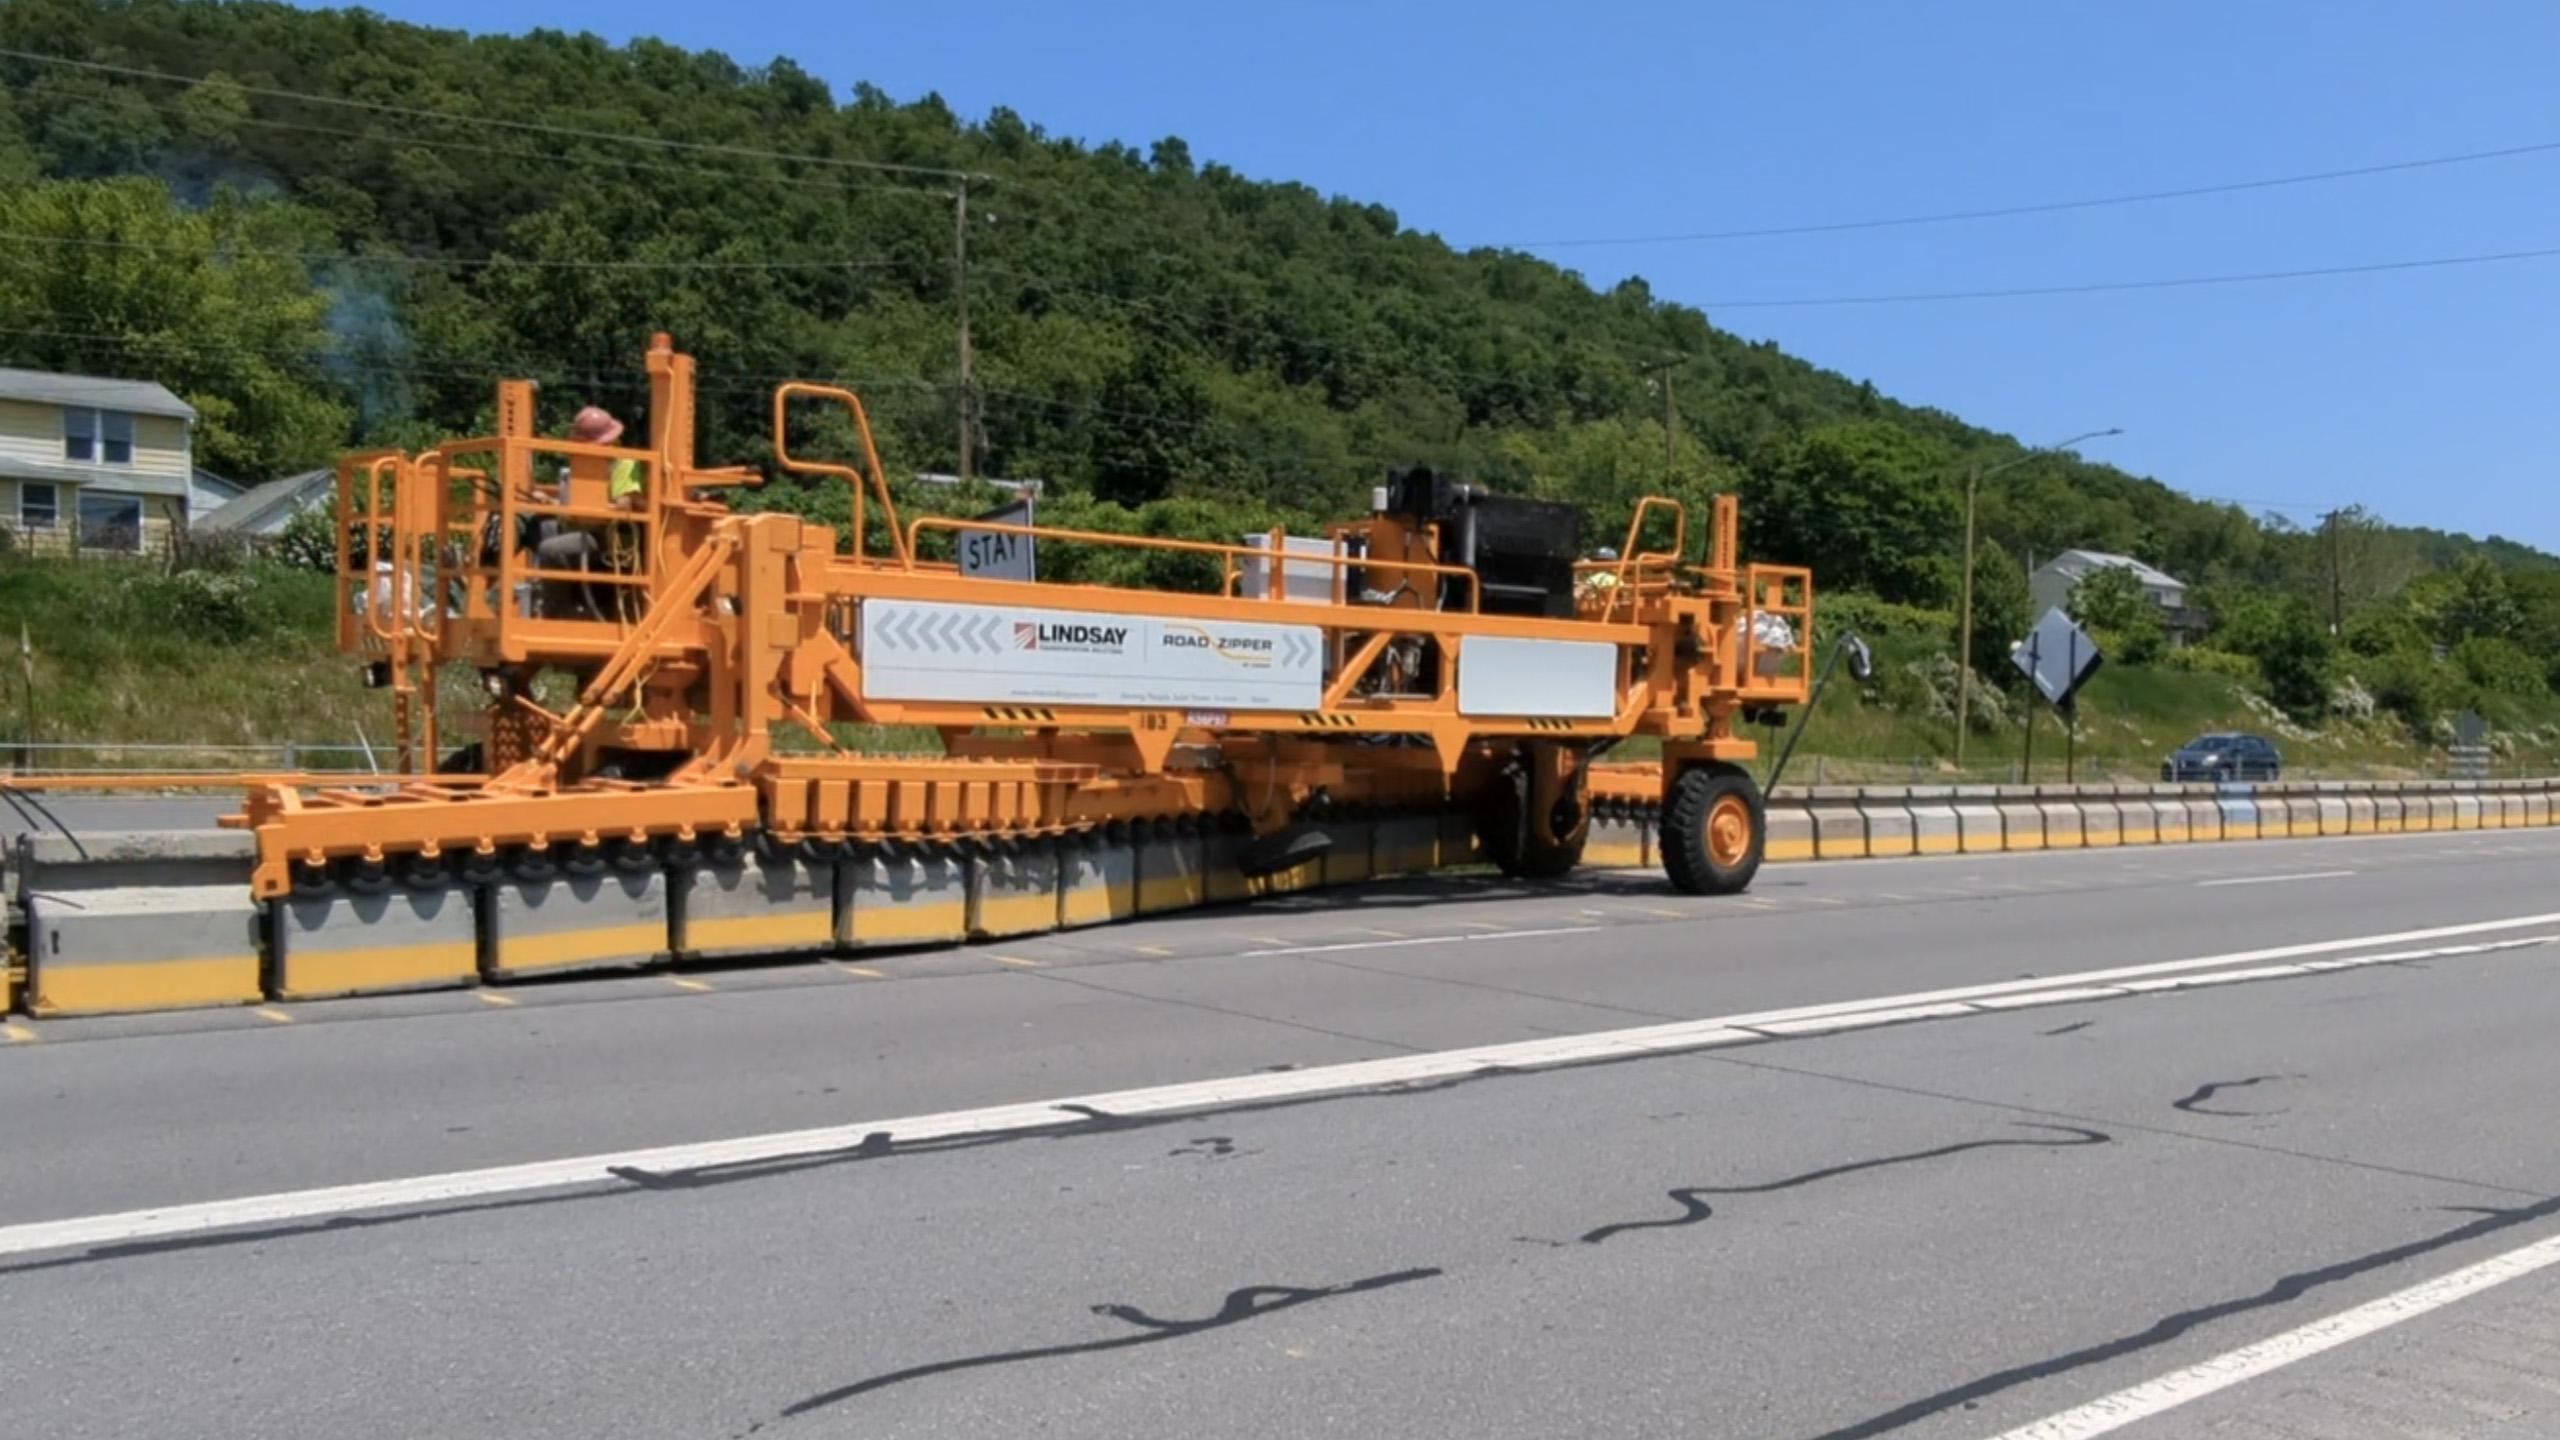 An image of a large orange piece of equipment being operated by two drivers in hard hats and yellow safety vests positioned on either end moving jersey barriers from one place on the roadway to another